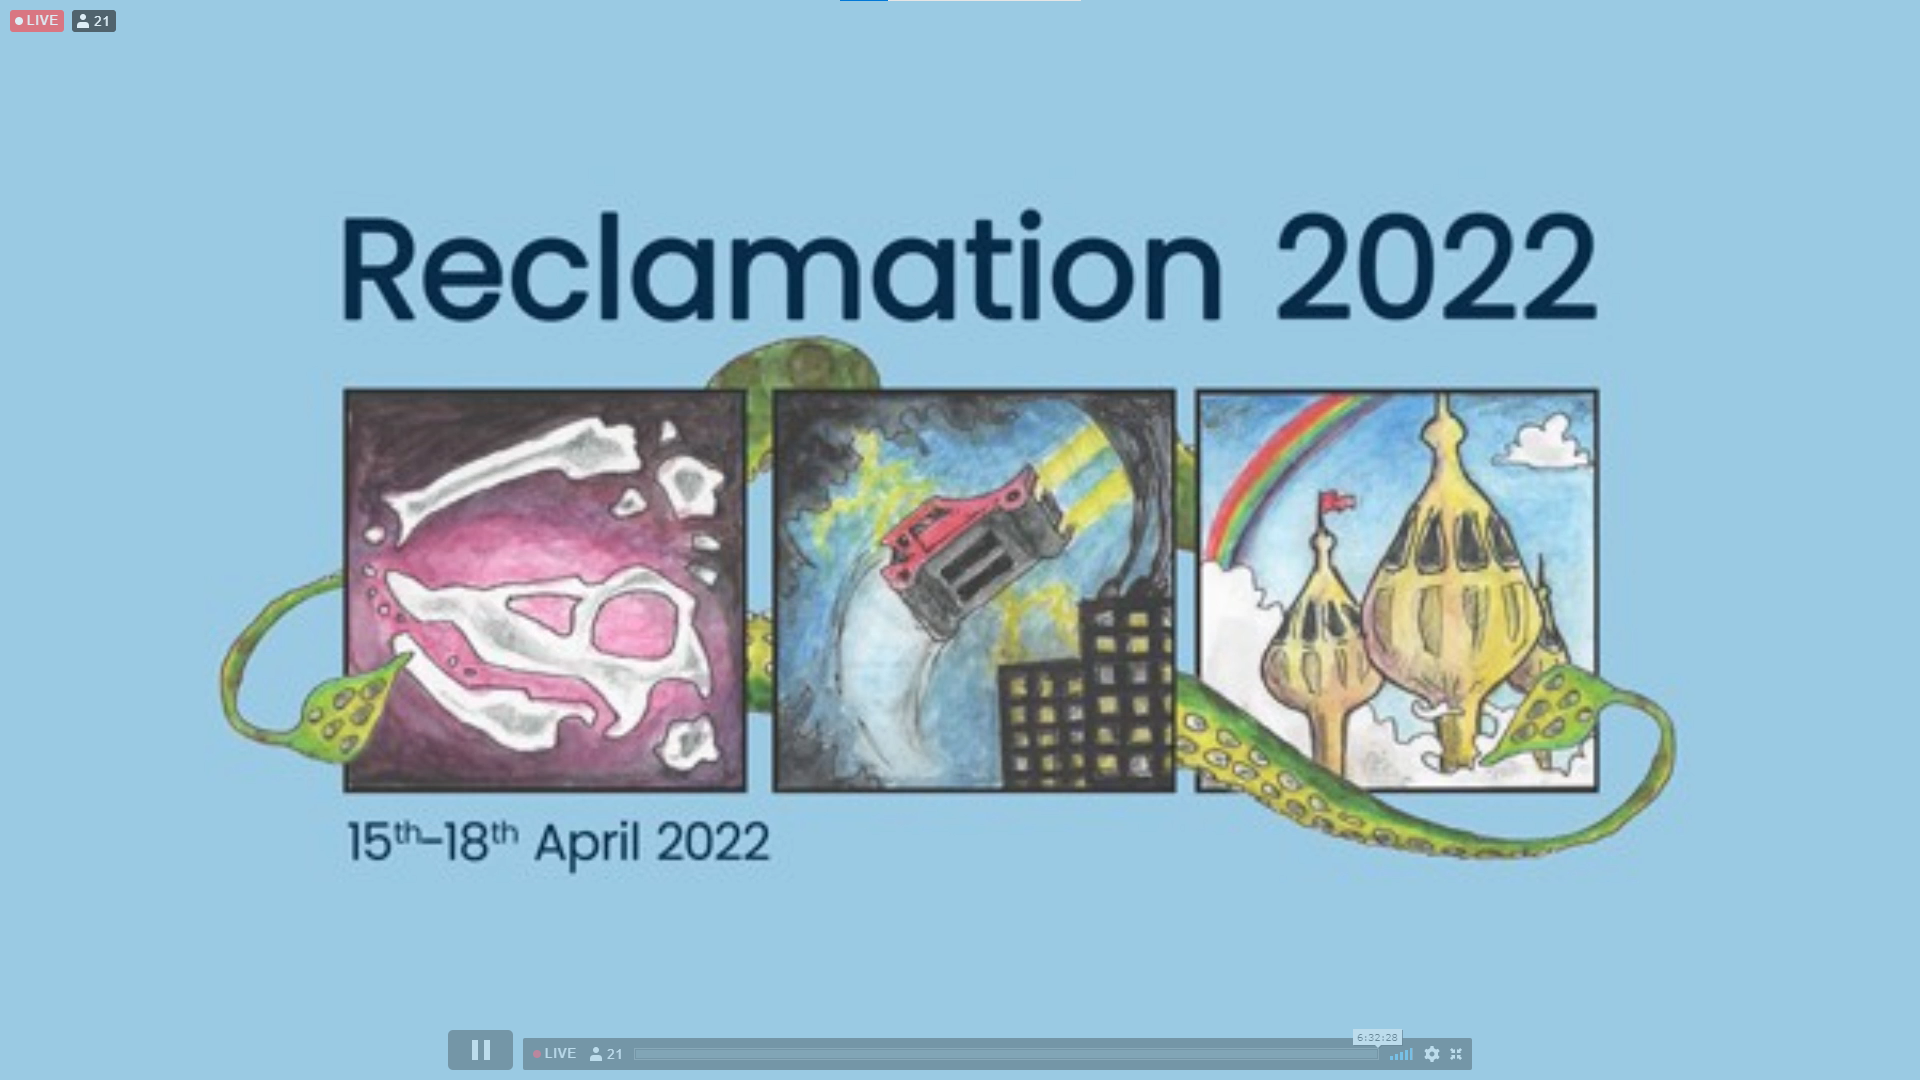 Screen from the streaming in a web player. Big text at the top says 'Reclamation 2022'. Below are three pictures. First shows some undergrounds bones. Second s flying car and third a city above the clouds. There is some tentacle creature hidden behind those pictures. At the bottom there are convention dates - 15th - 18th April 2022. The background of the picture is light blue. 